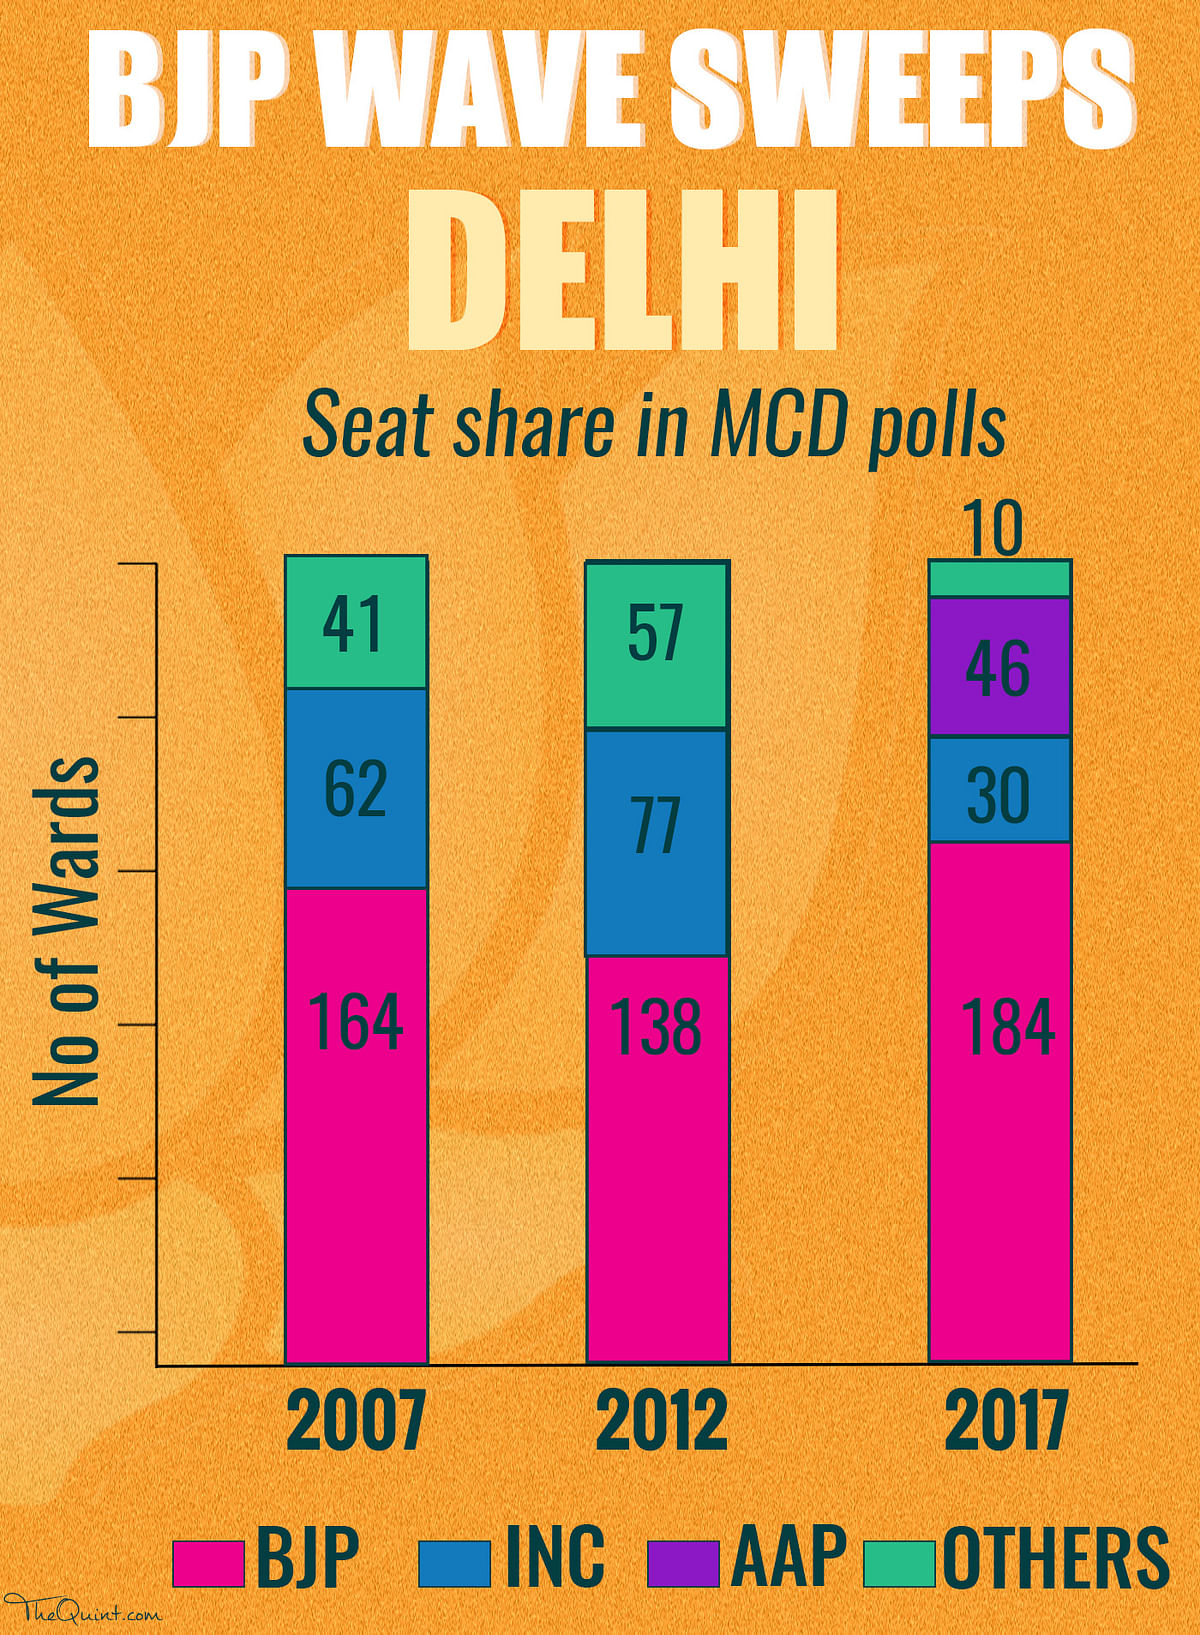 Anti-incumbency played spoilsport for the AAP in MCD elections, the party should learn lessons from the defeat.